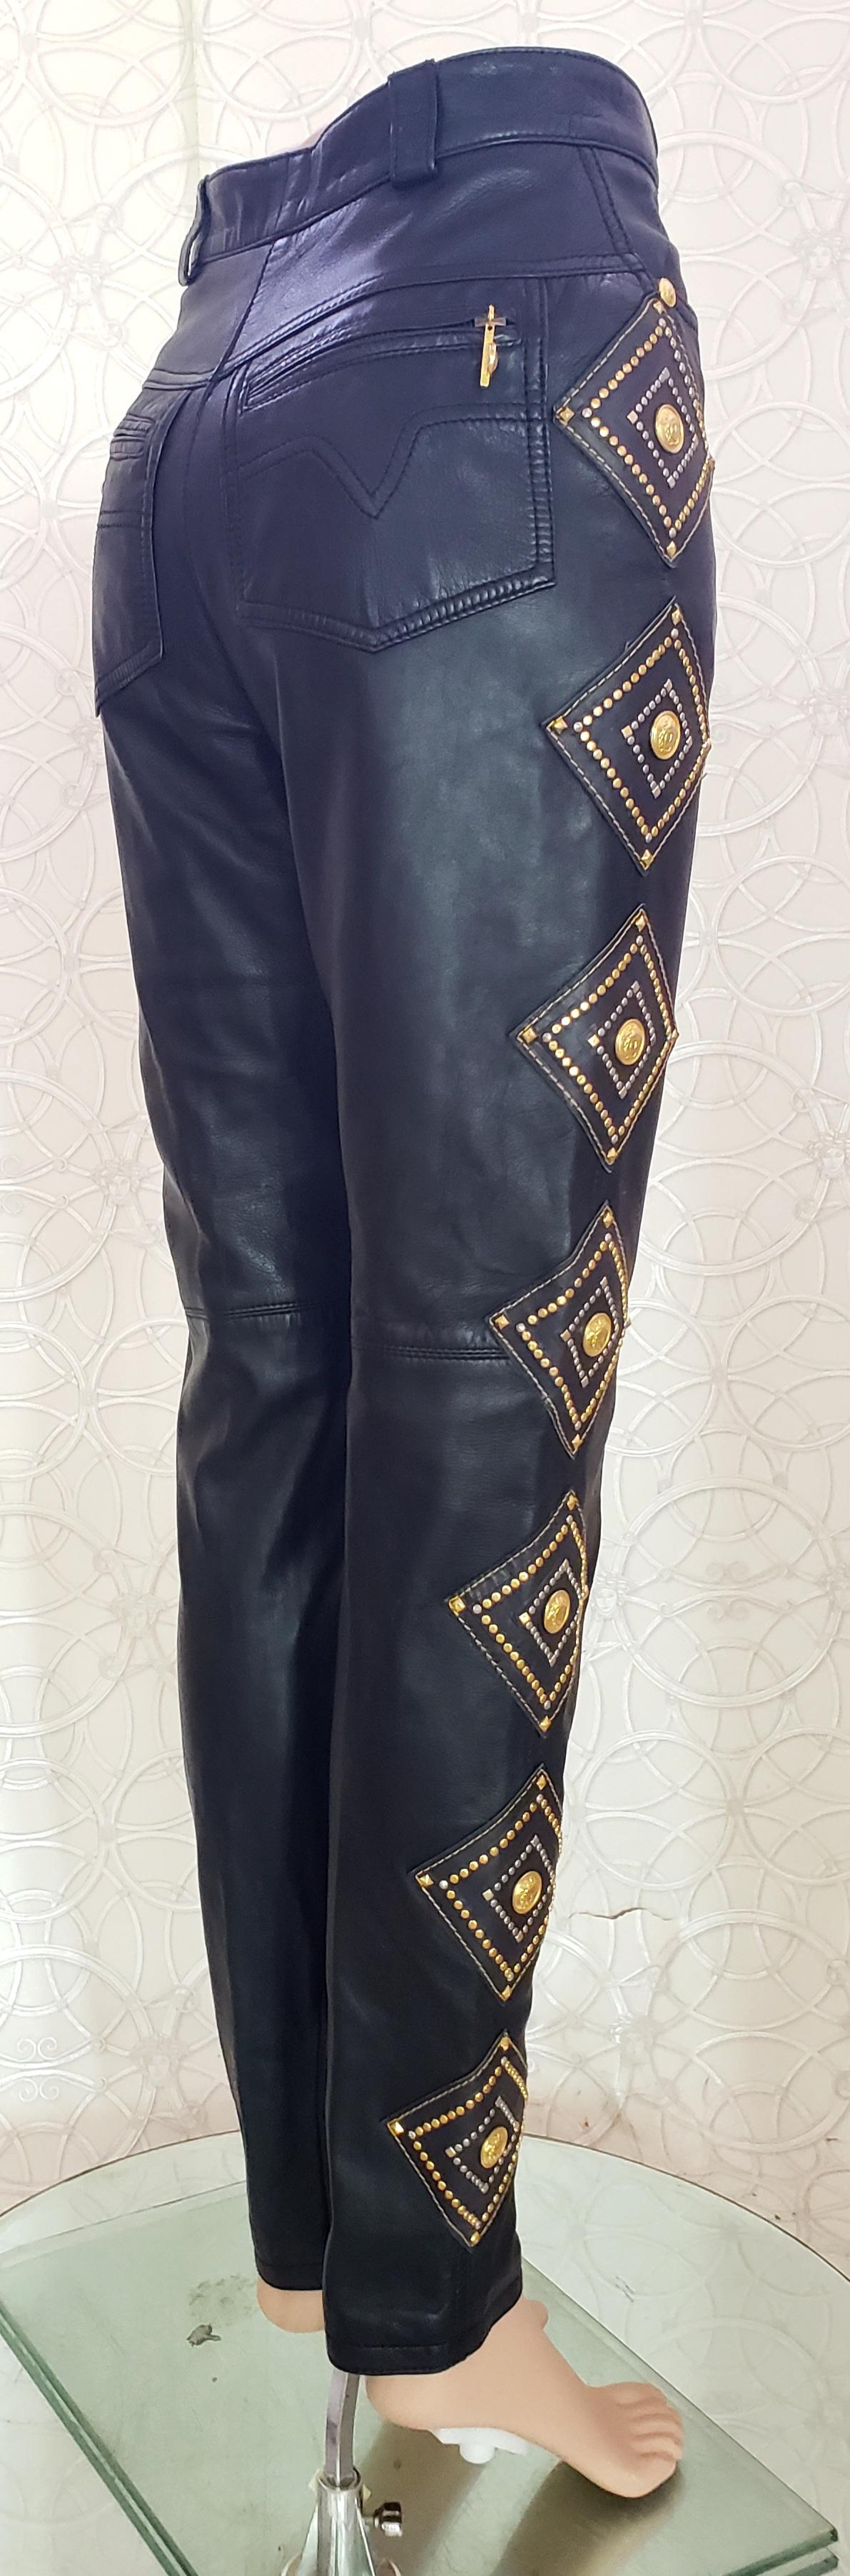 1991 GIANNI VERSACE PRIVATE MUSEUM WORTHY COLLECTION BLACK LEATHER STUDDED Pants For Sale 3